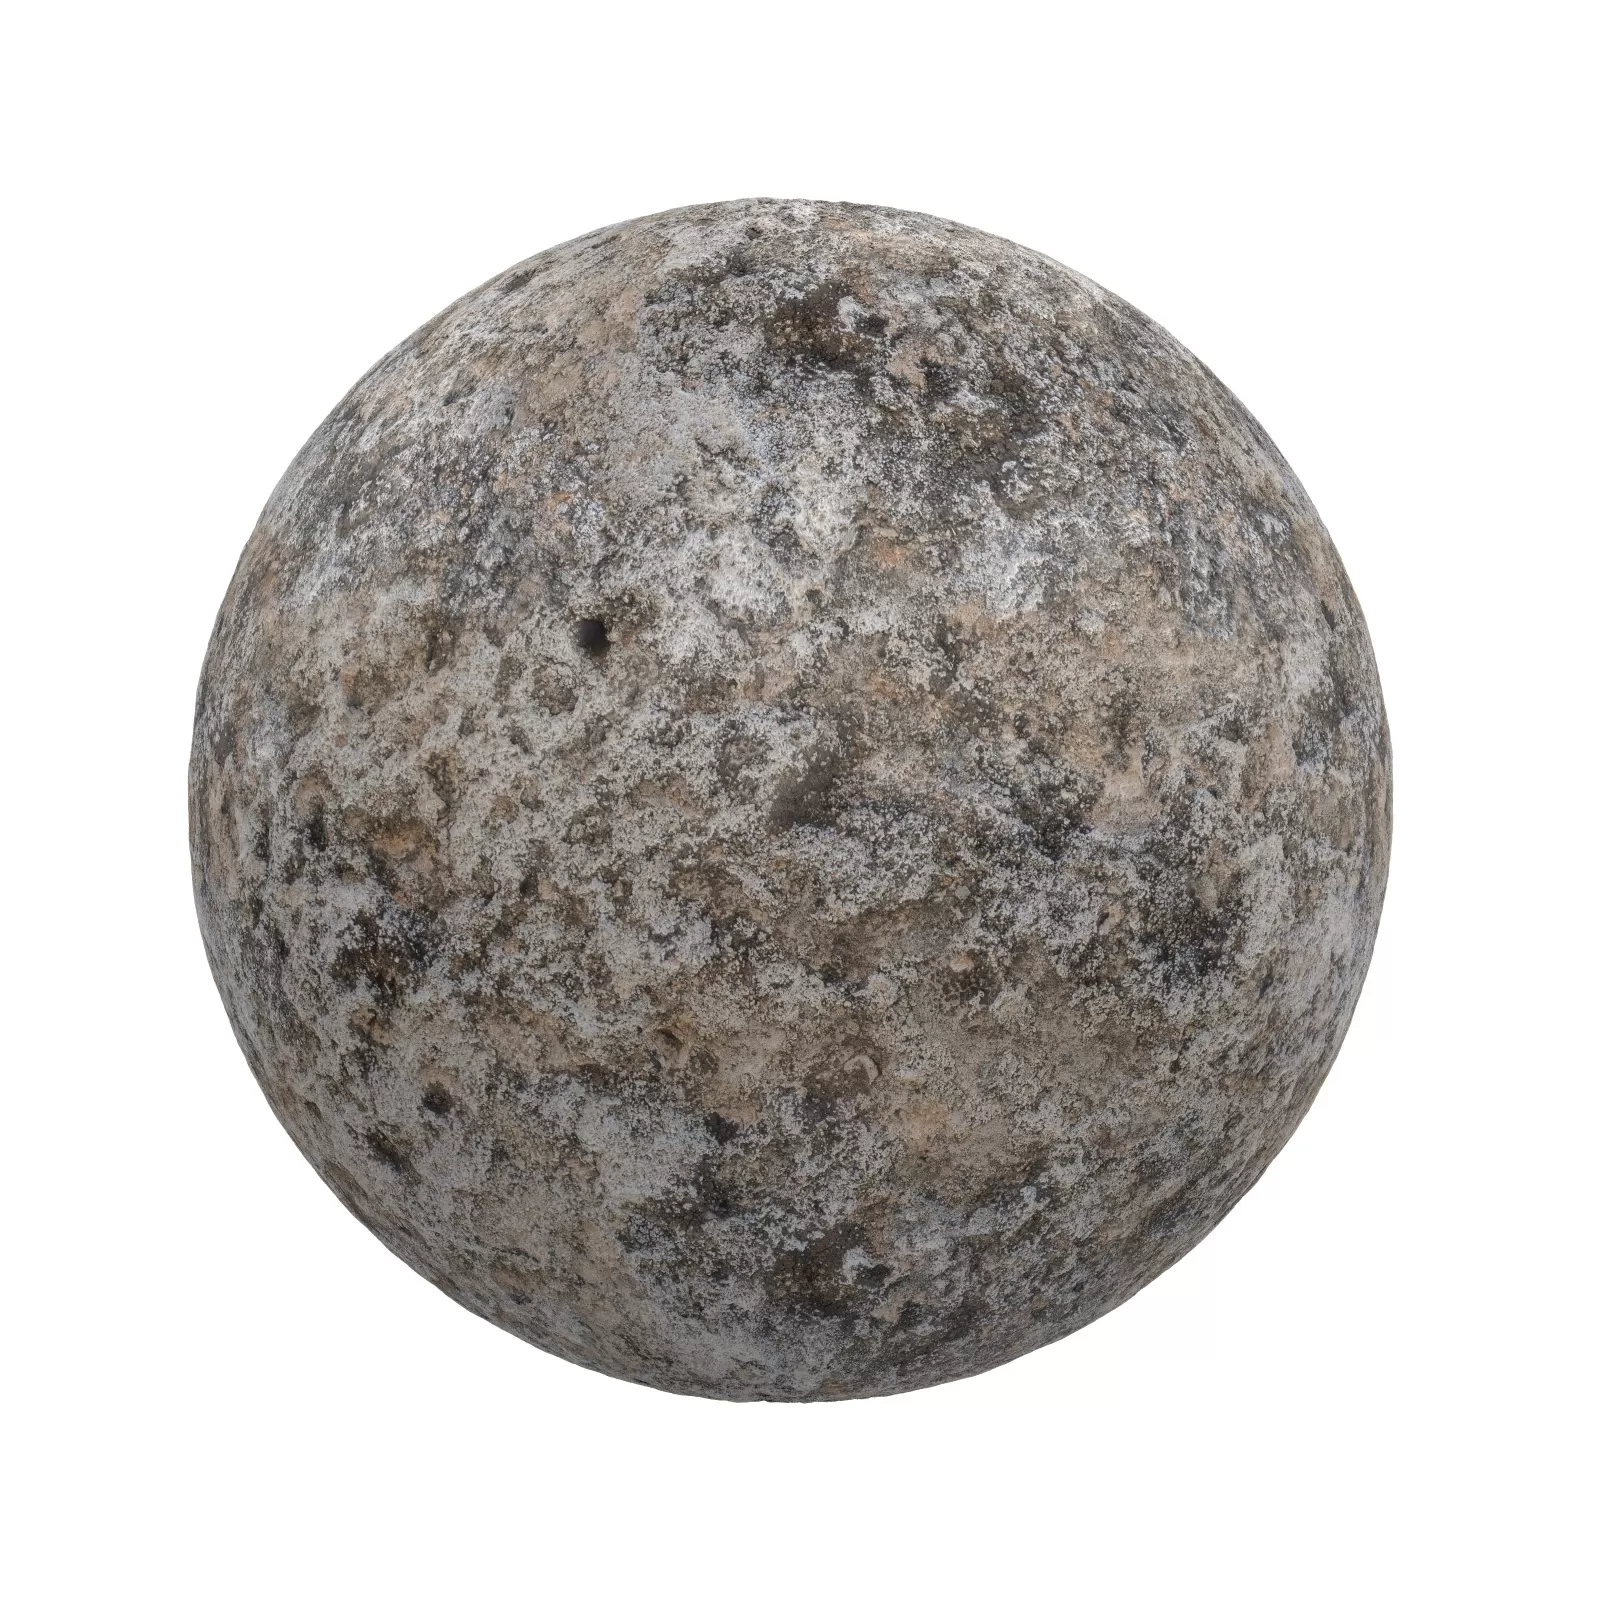 TEXTURES – STONES – CGAxis PBR Colection Vol 1 Stones – rough brown stone 2